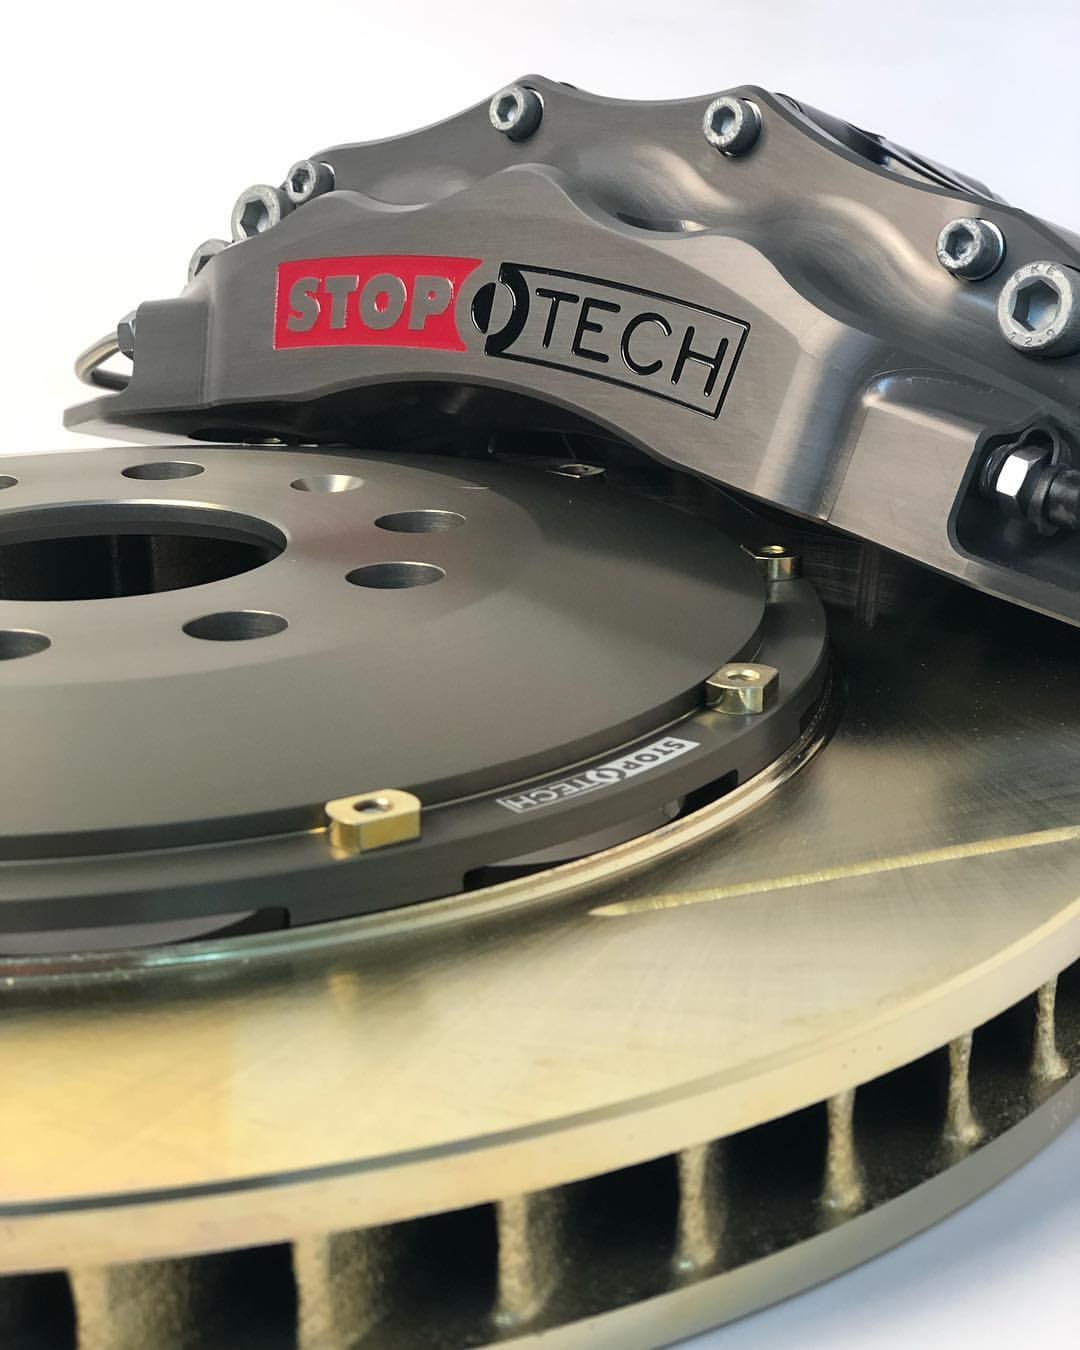 New StopTech car brakes that don’t need repair so far